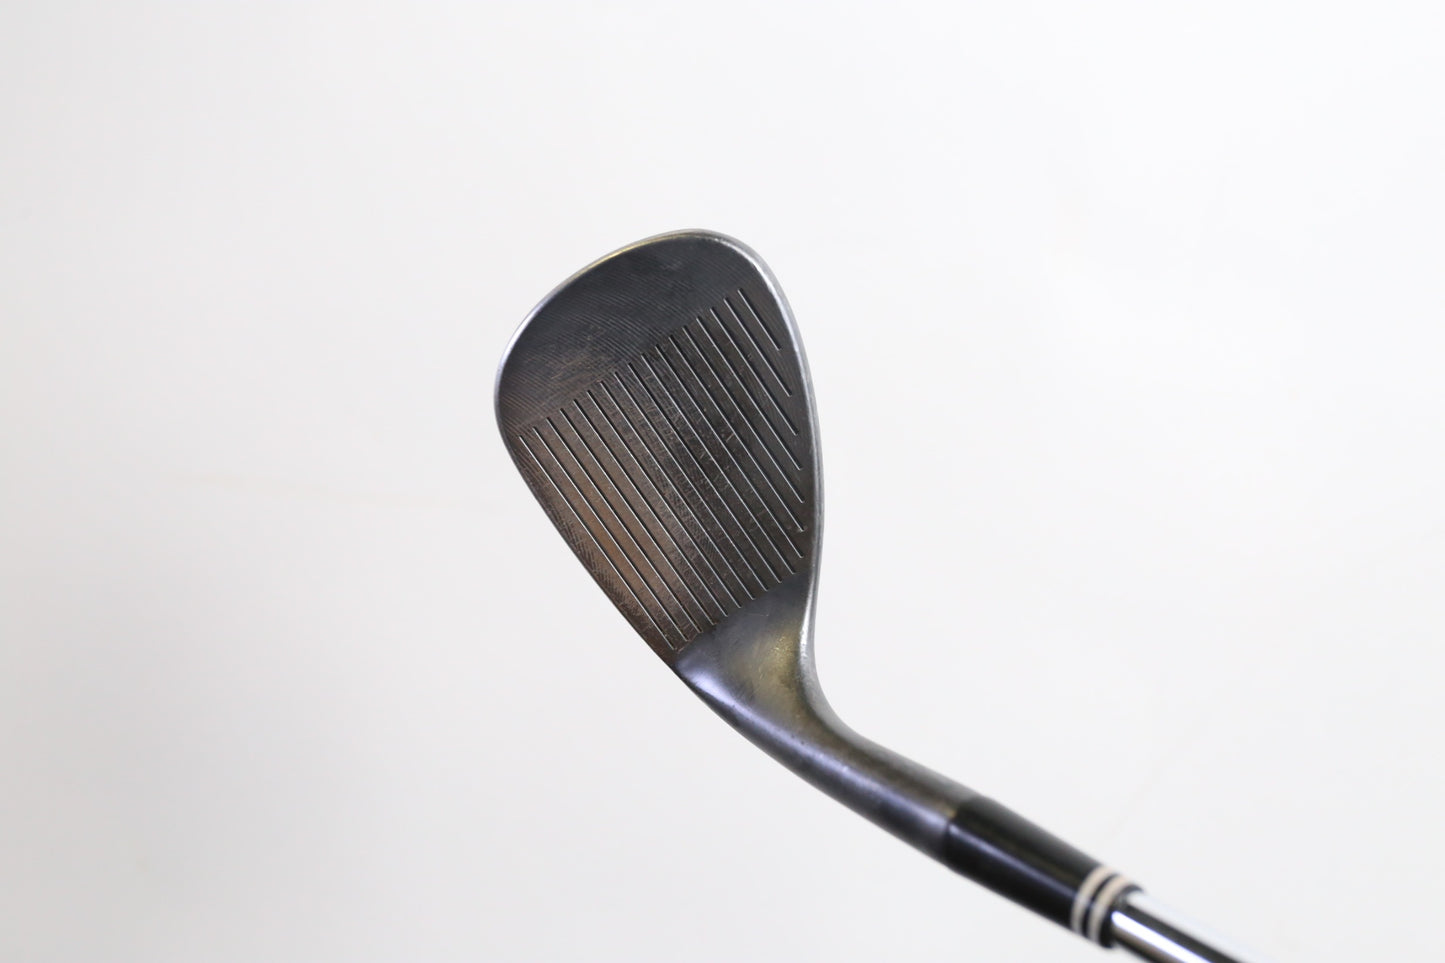 Used Cleveland RTX-3 Black Satin Sand Wedge - Right-Handed - 56 Degrees - Stiff Flex